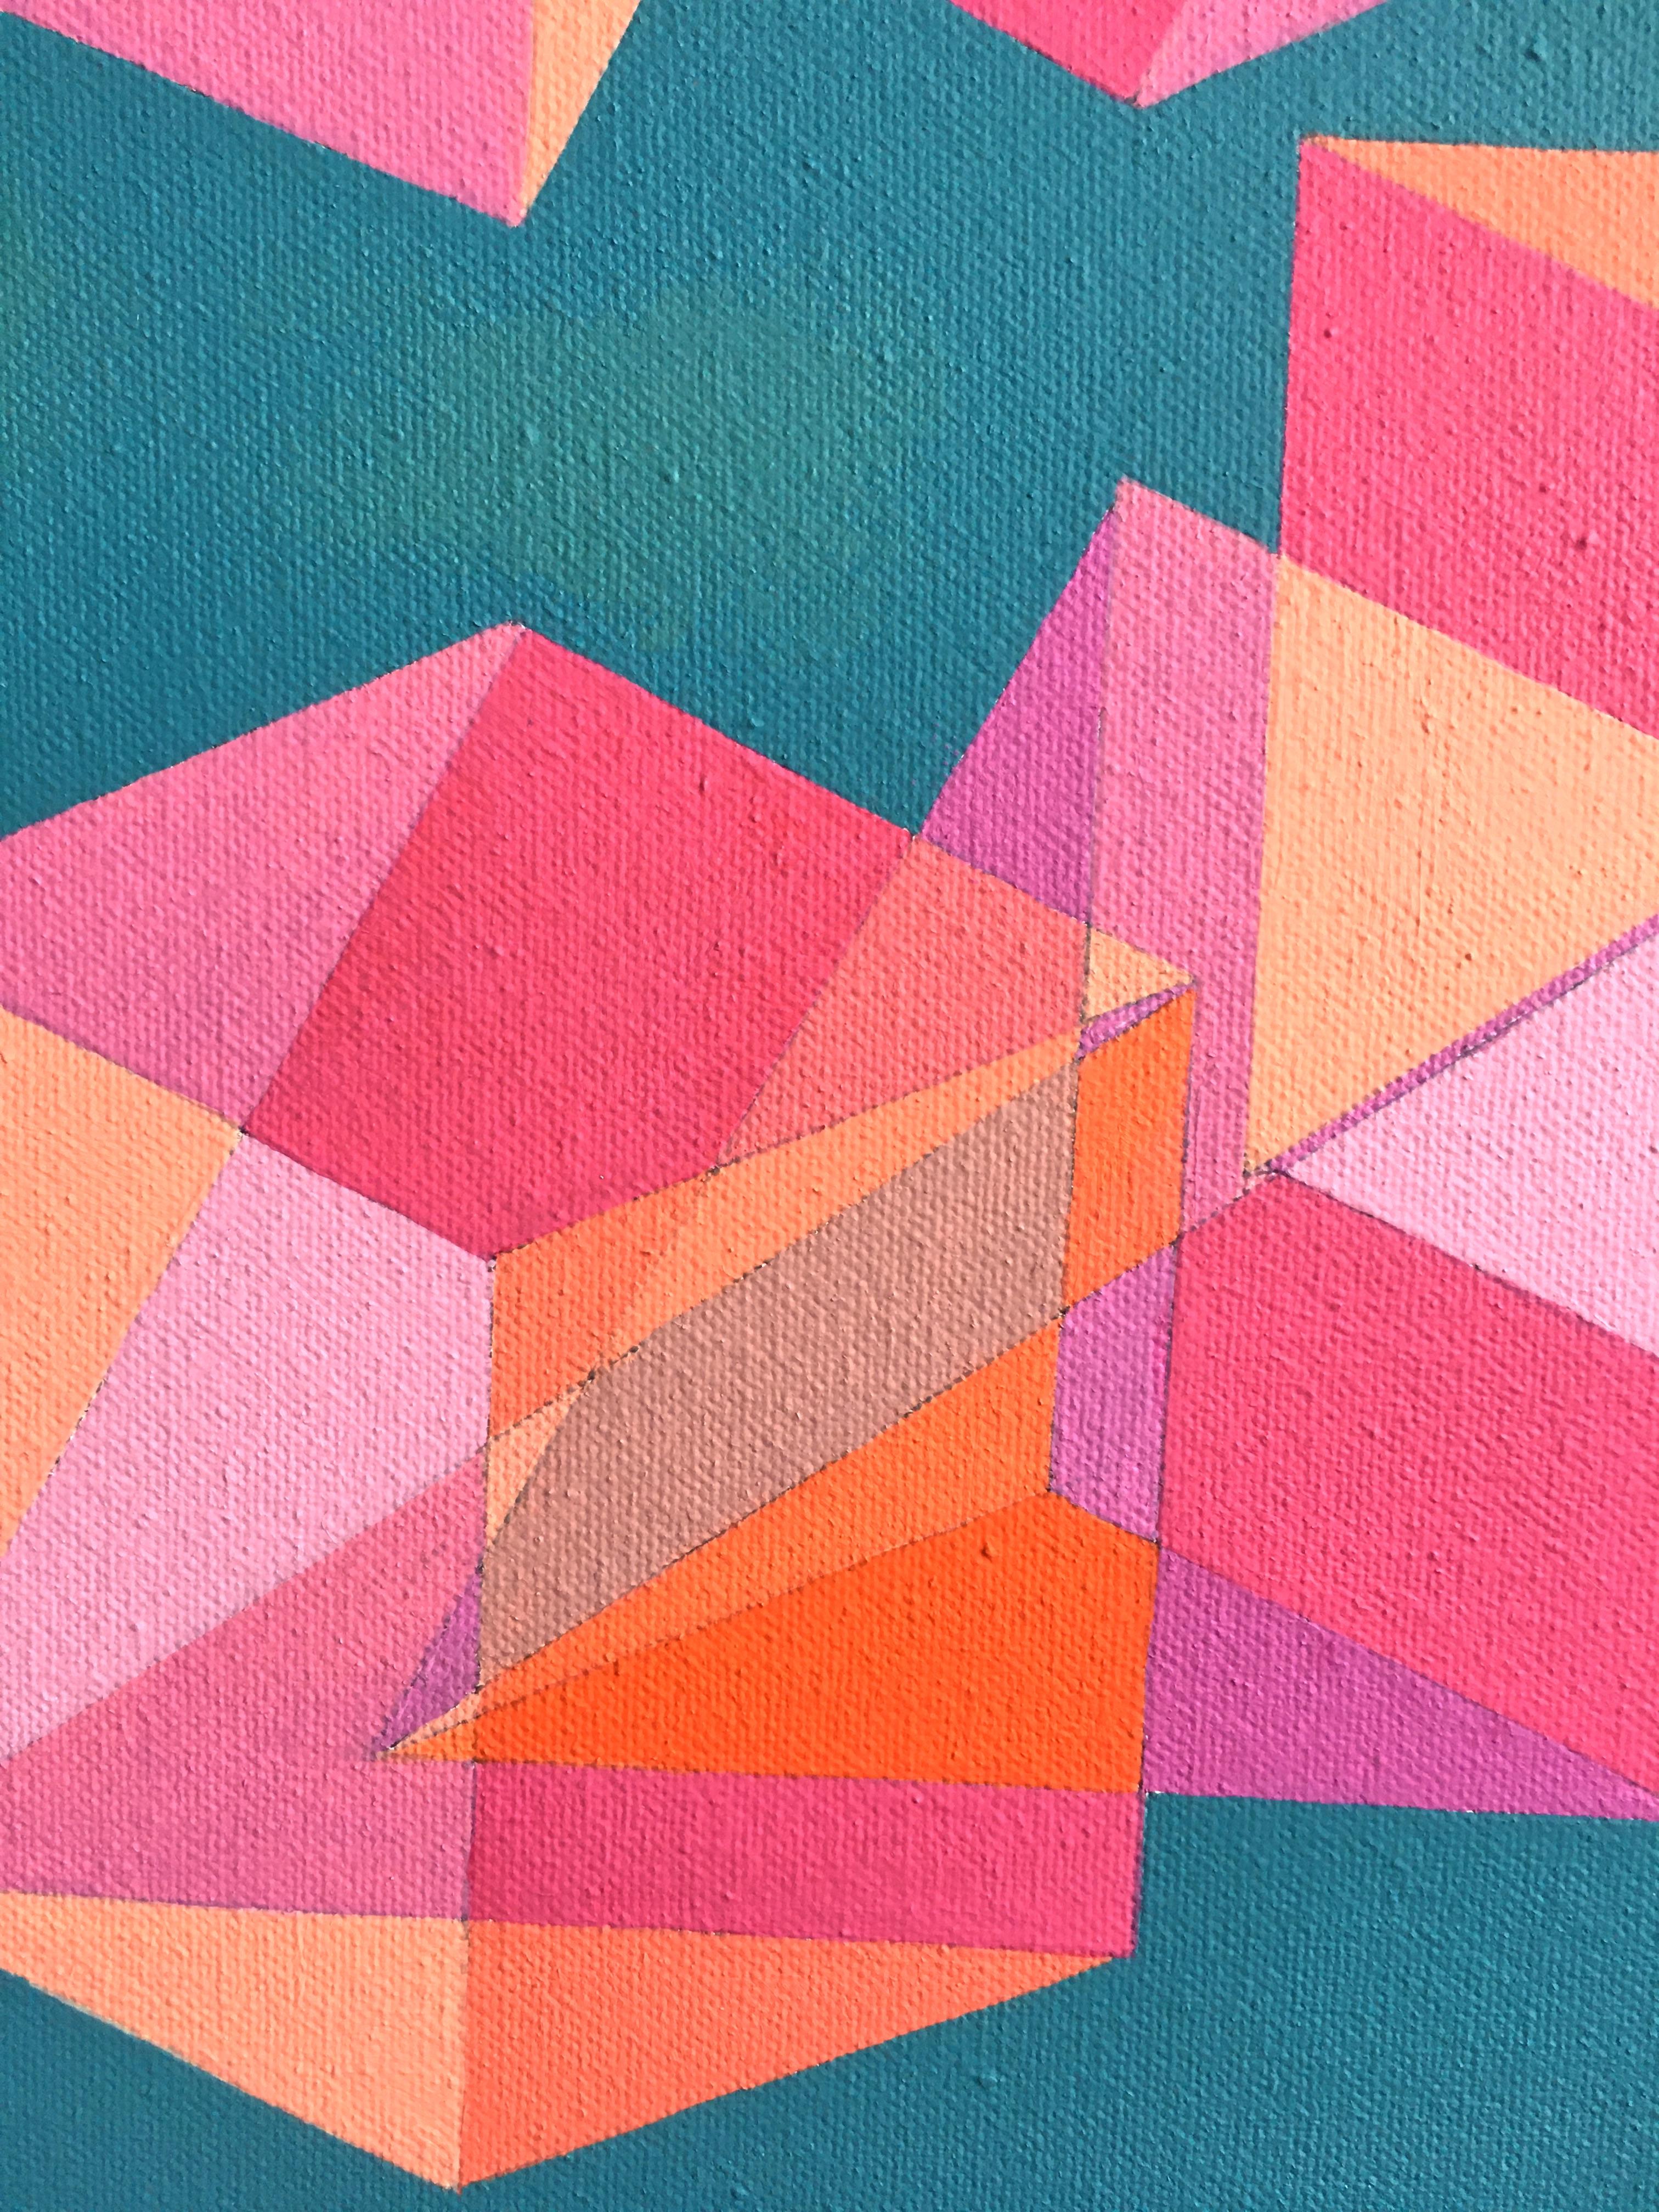 Cubes Divided Equally into Three #7: geometric abstract painting w/ blue & pink - Painting by Benjamin Weaver